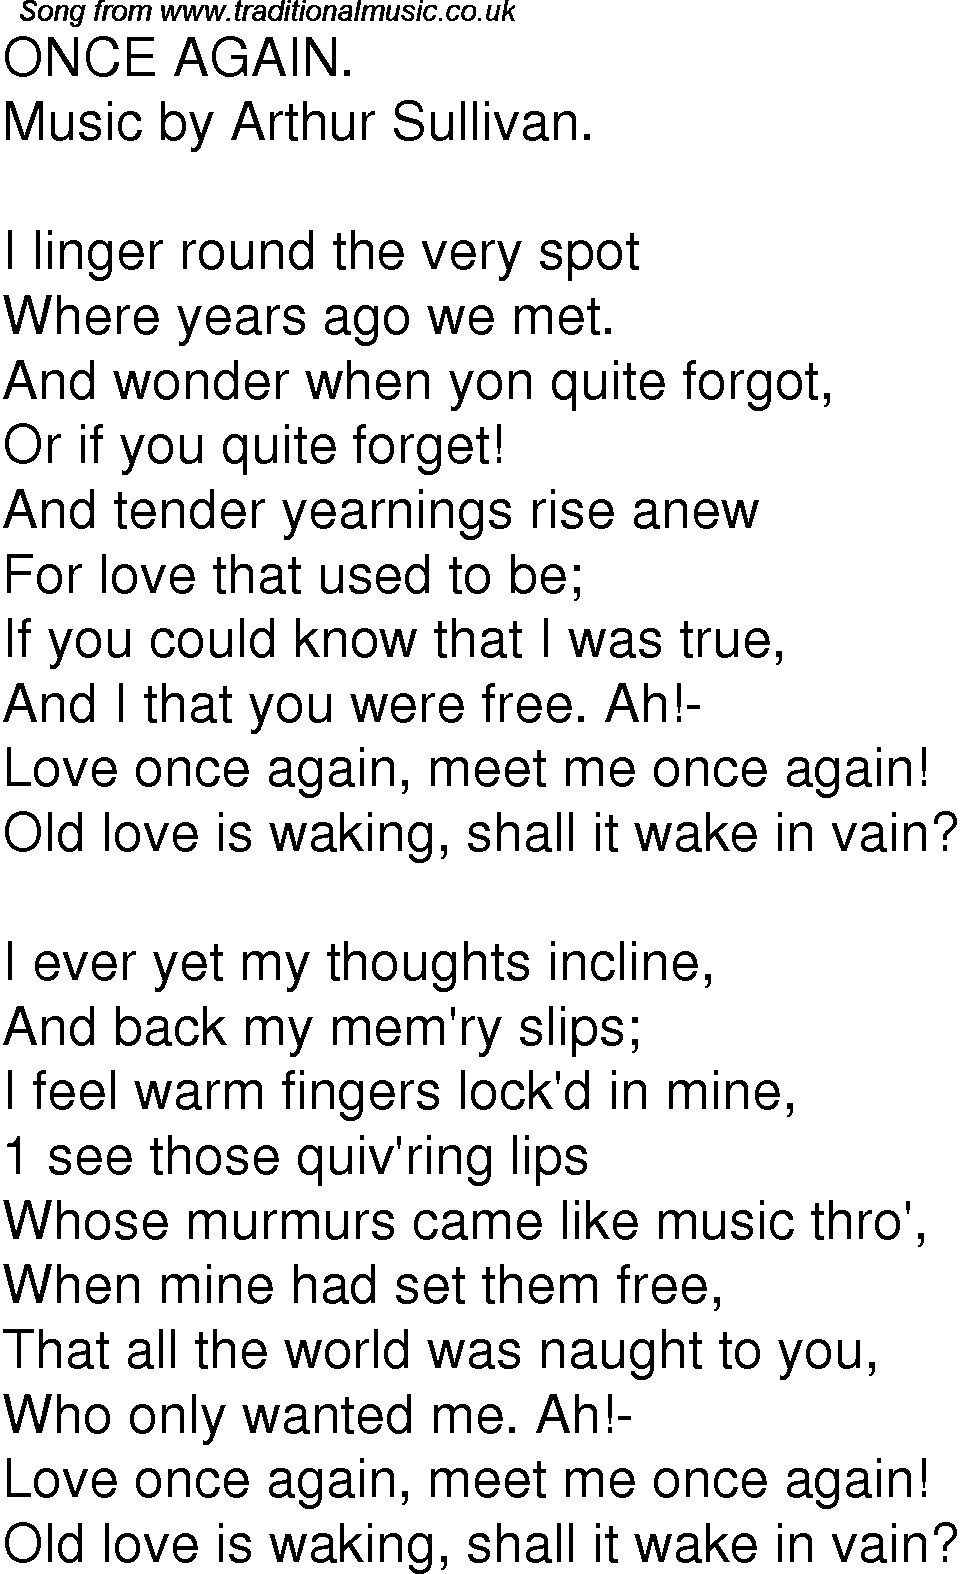 Old Time Song Lyrics for 08 Once Again